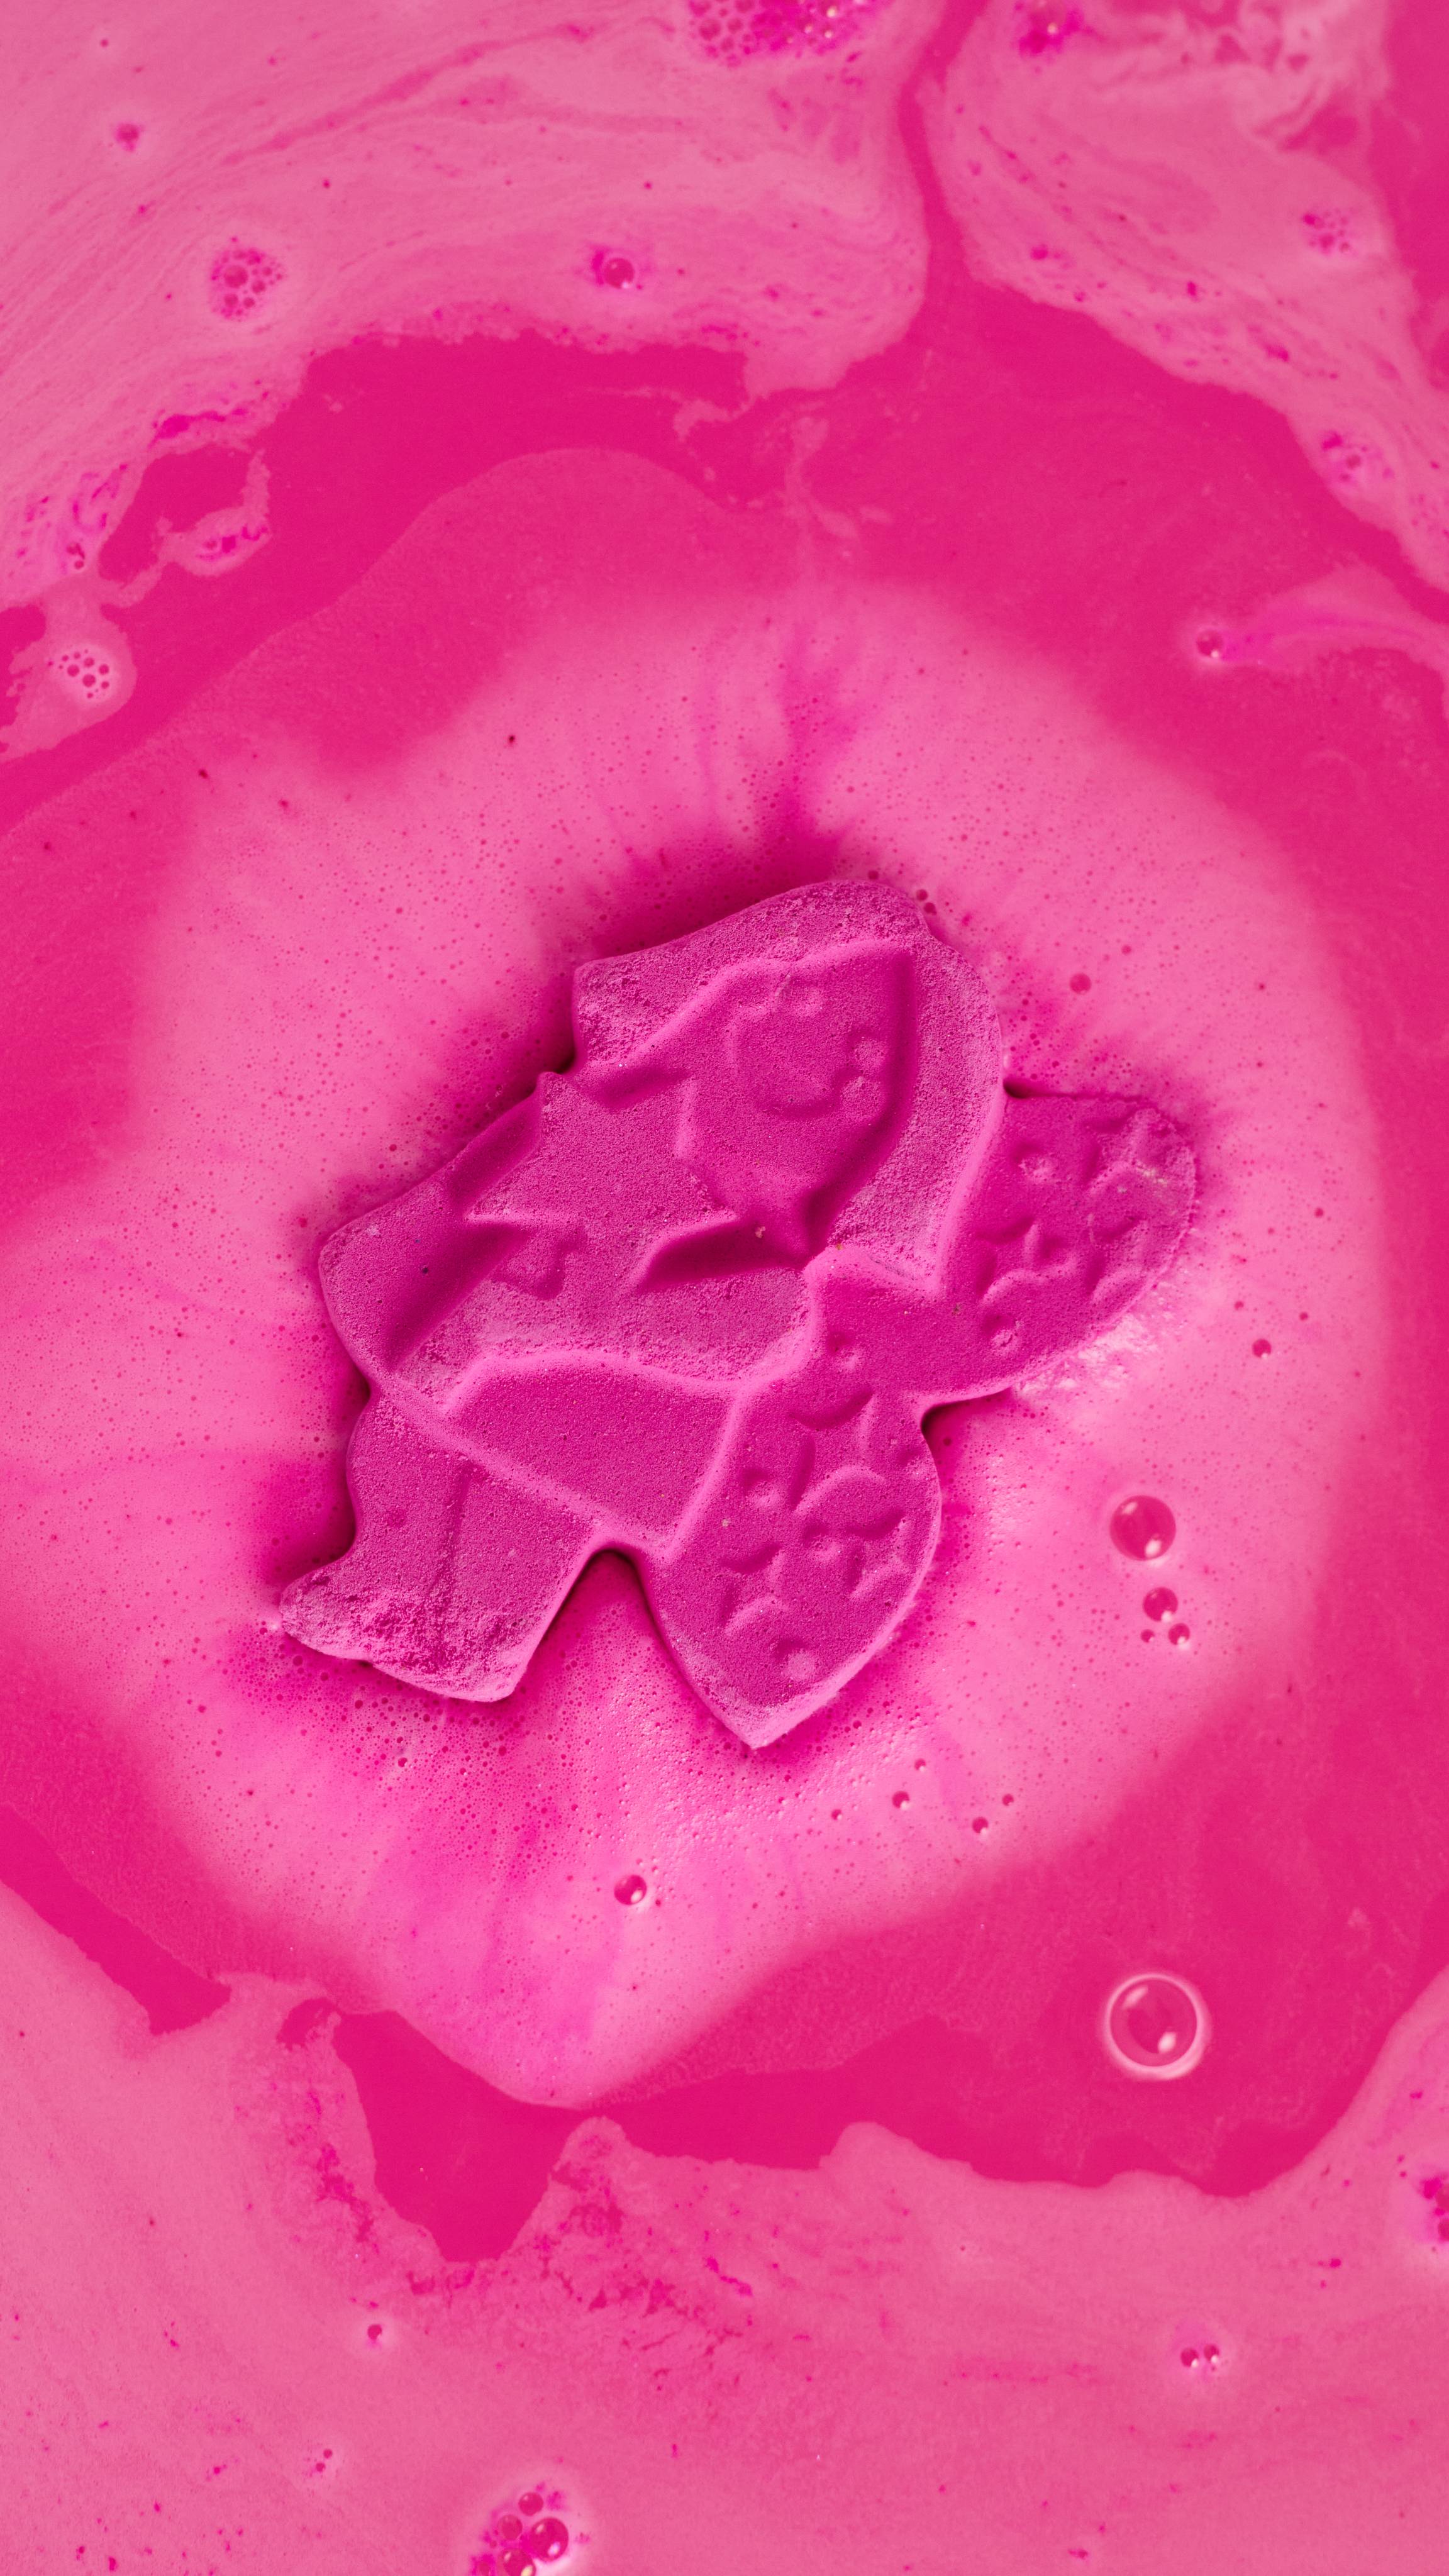 Groovy Fairy bath bomb is melting into the bath water creating layers of deep pink, foamy swirls.